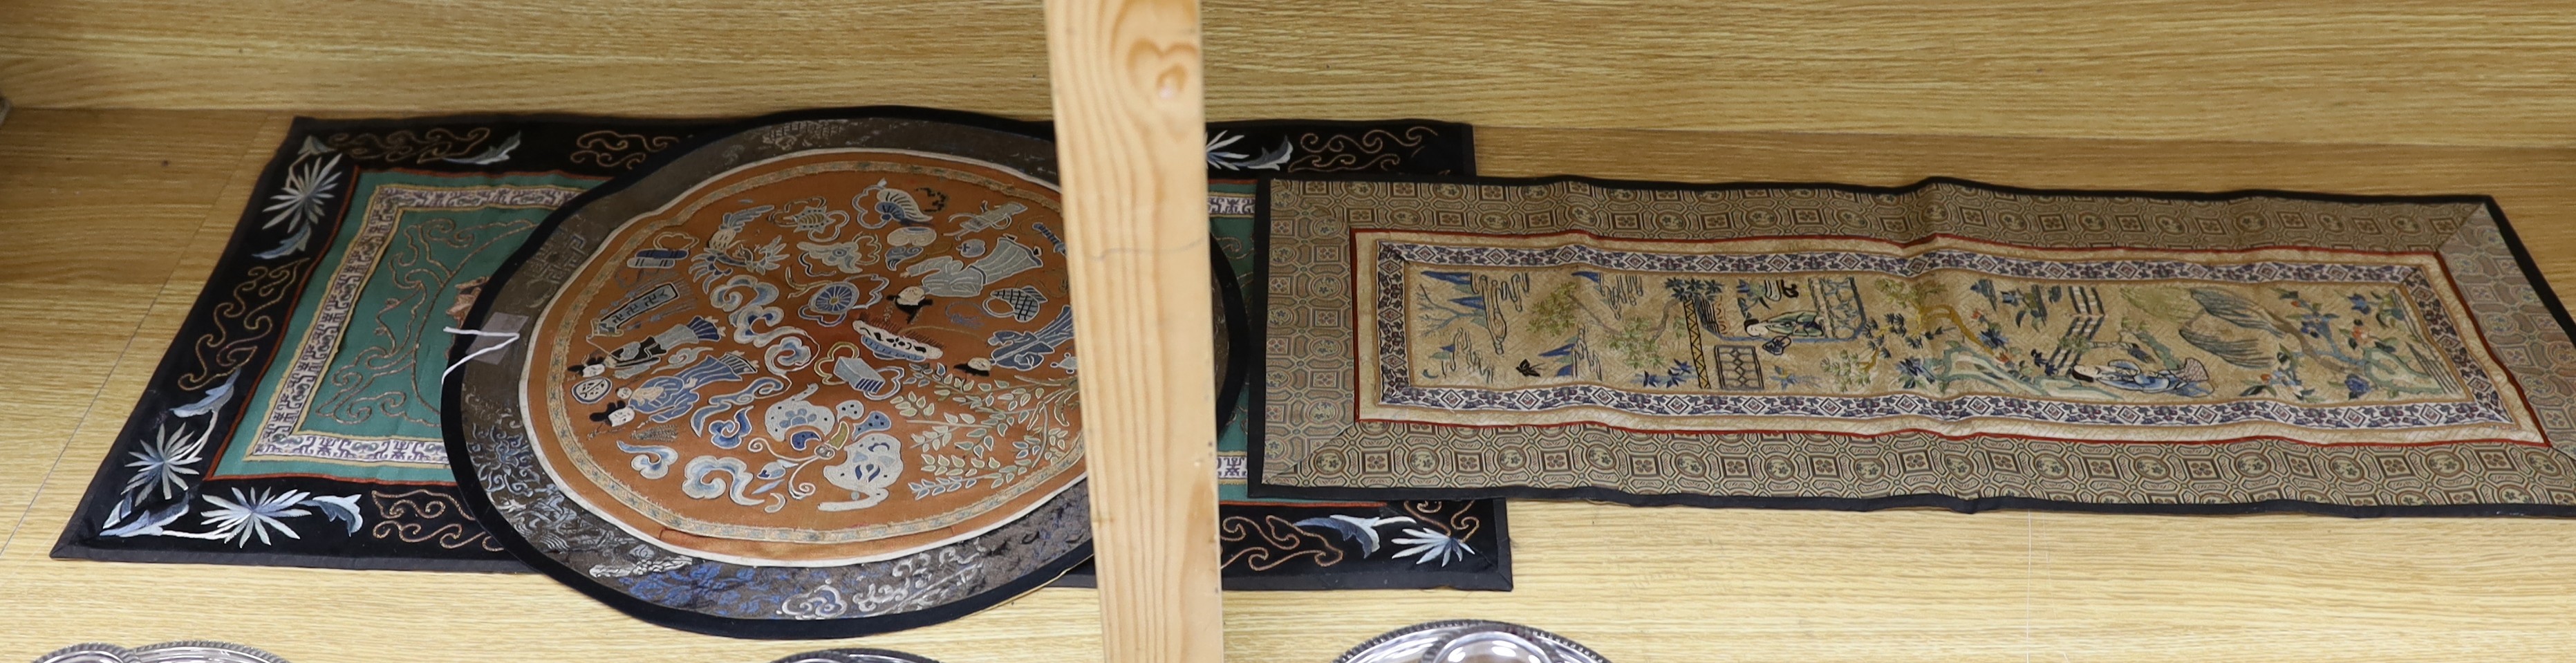 Three Chinese embroidered panels, one embroidered with Chinese knot